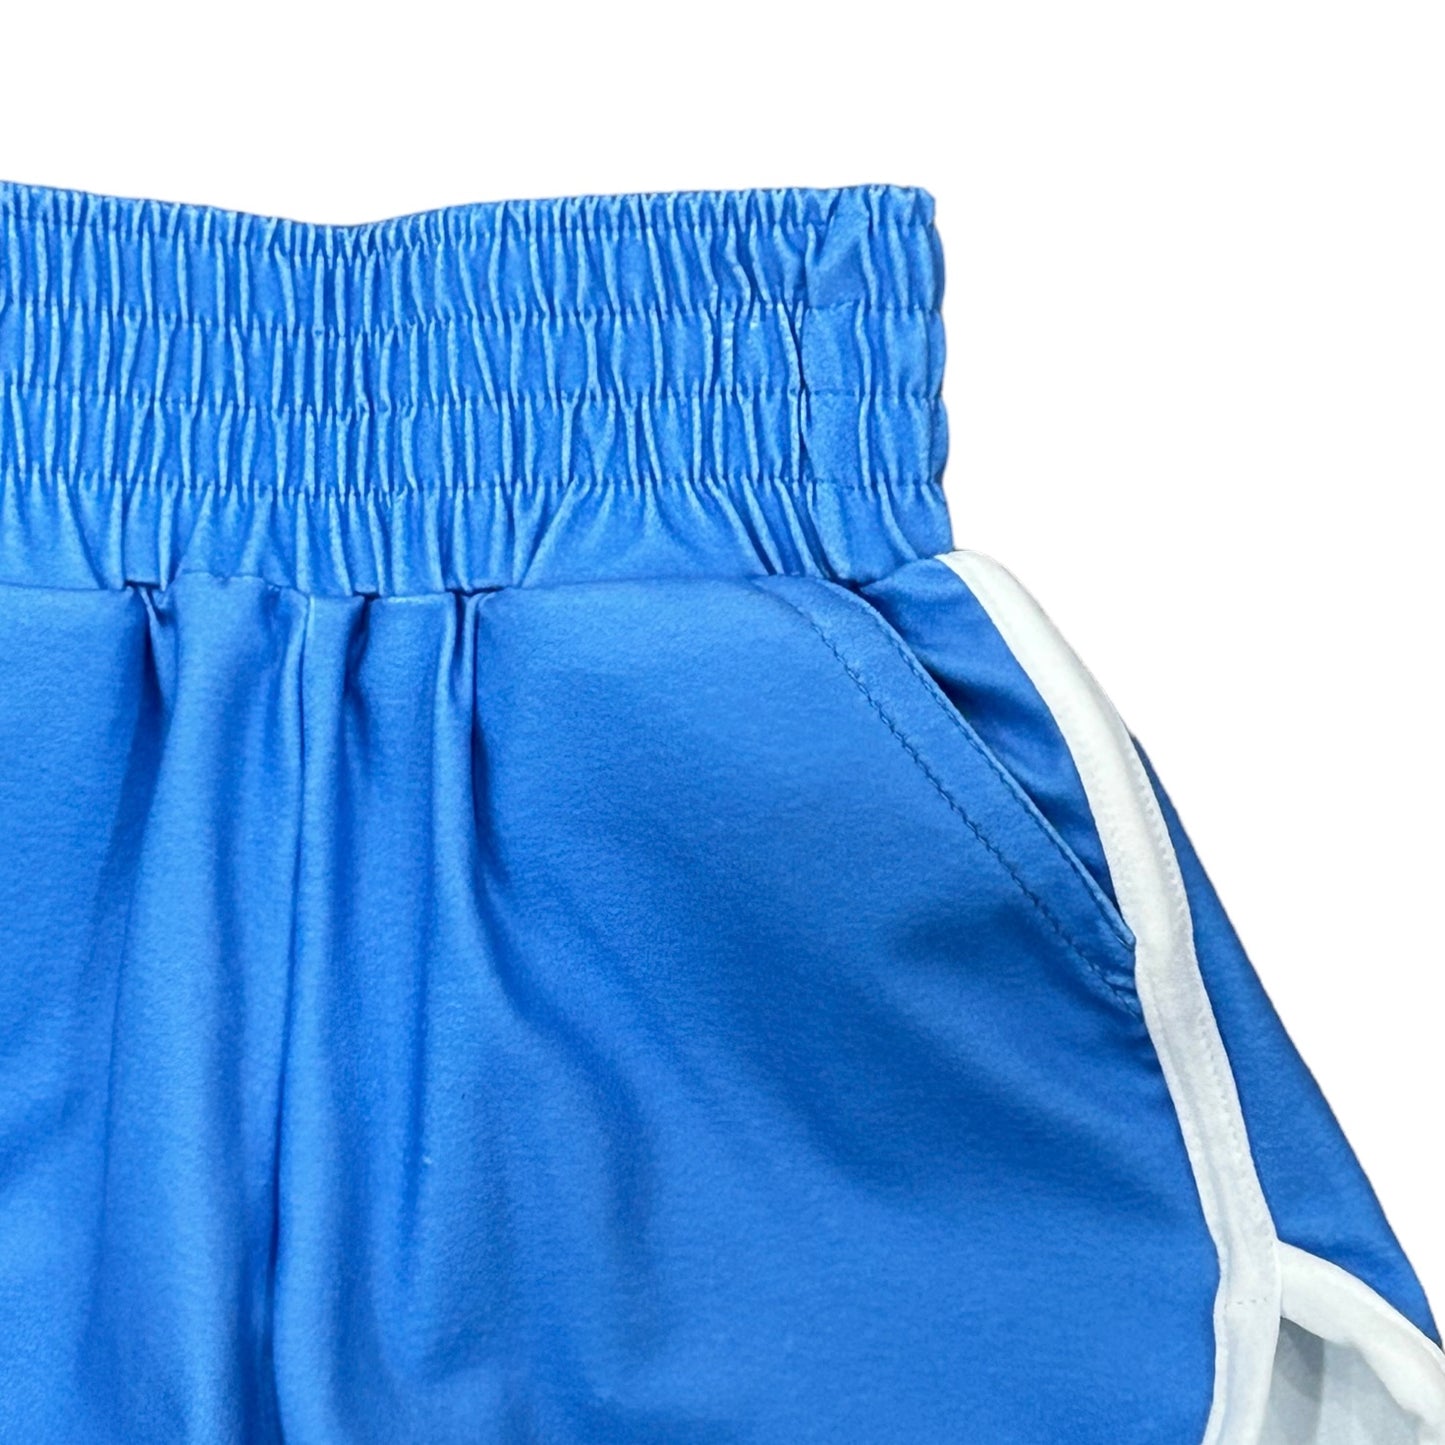 Track Shorts - French Blue